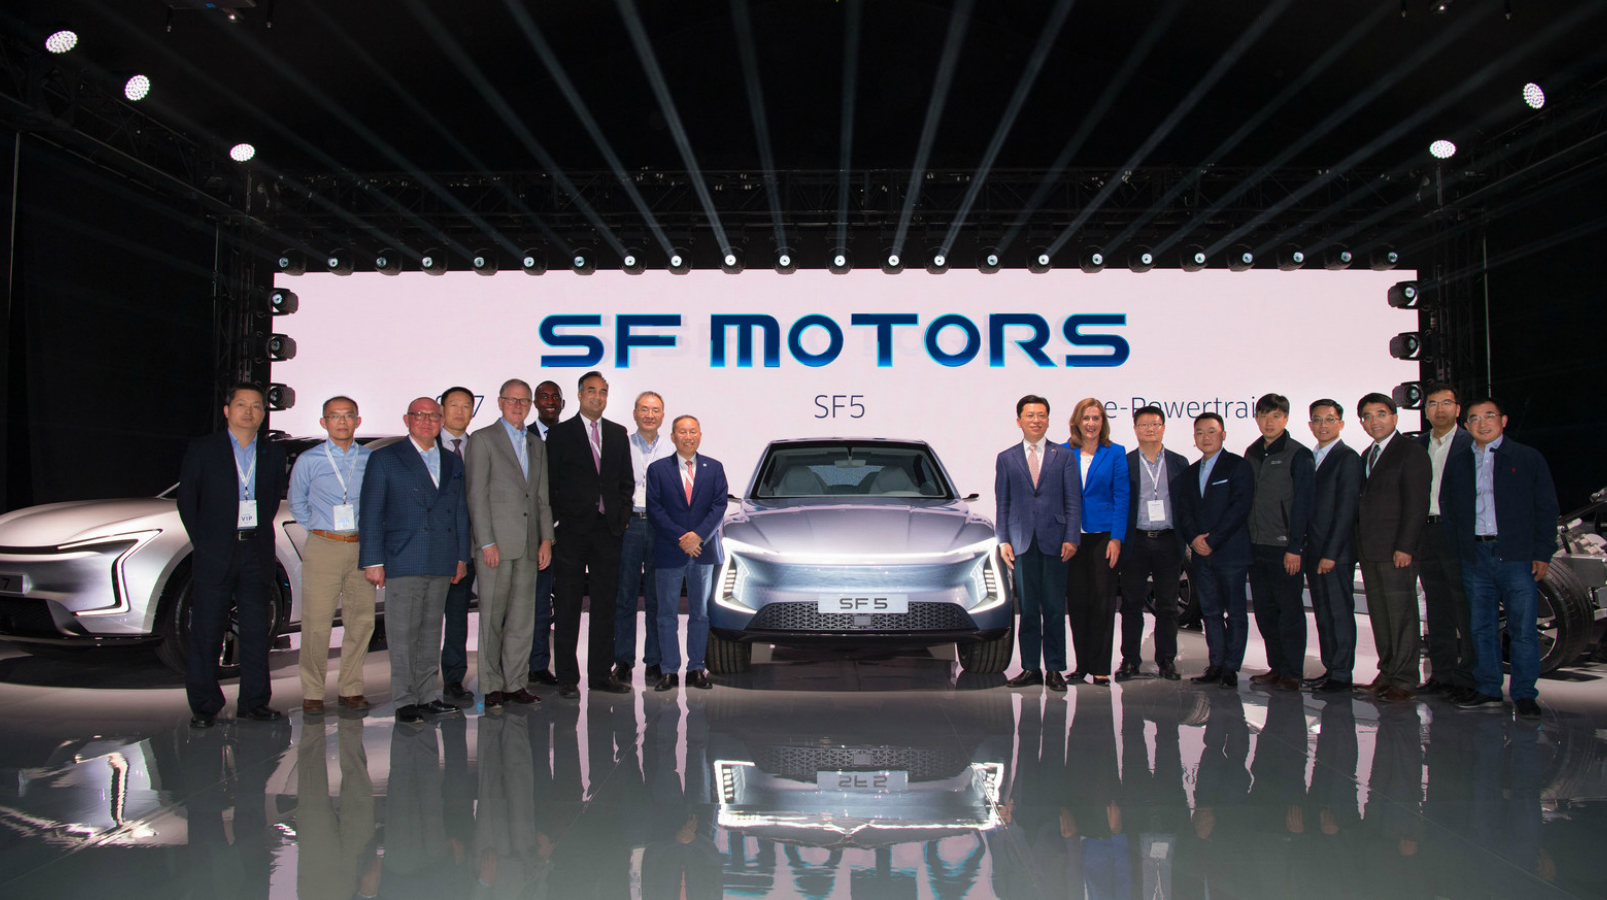 SF Motors Launch with SF5